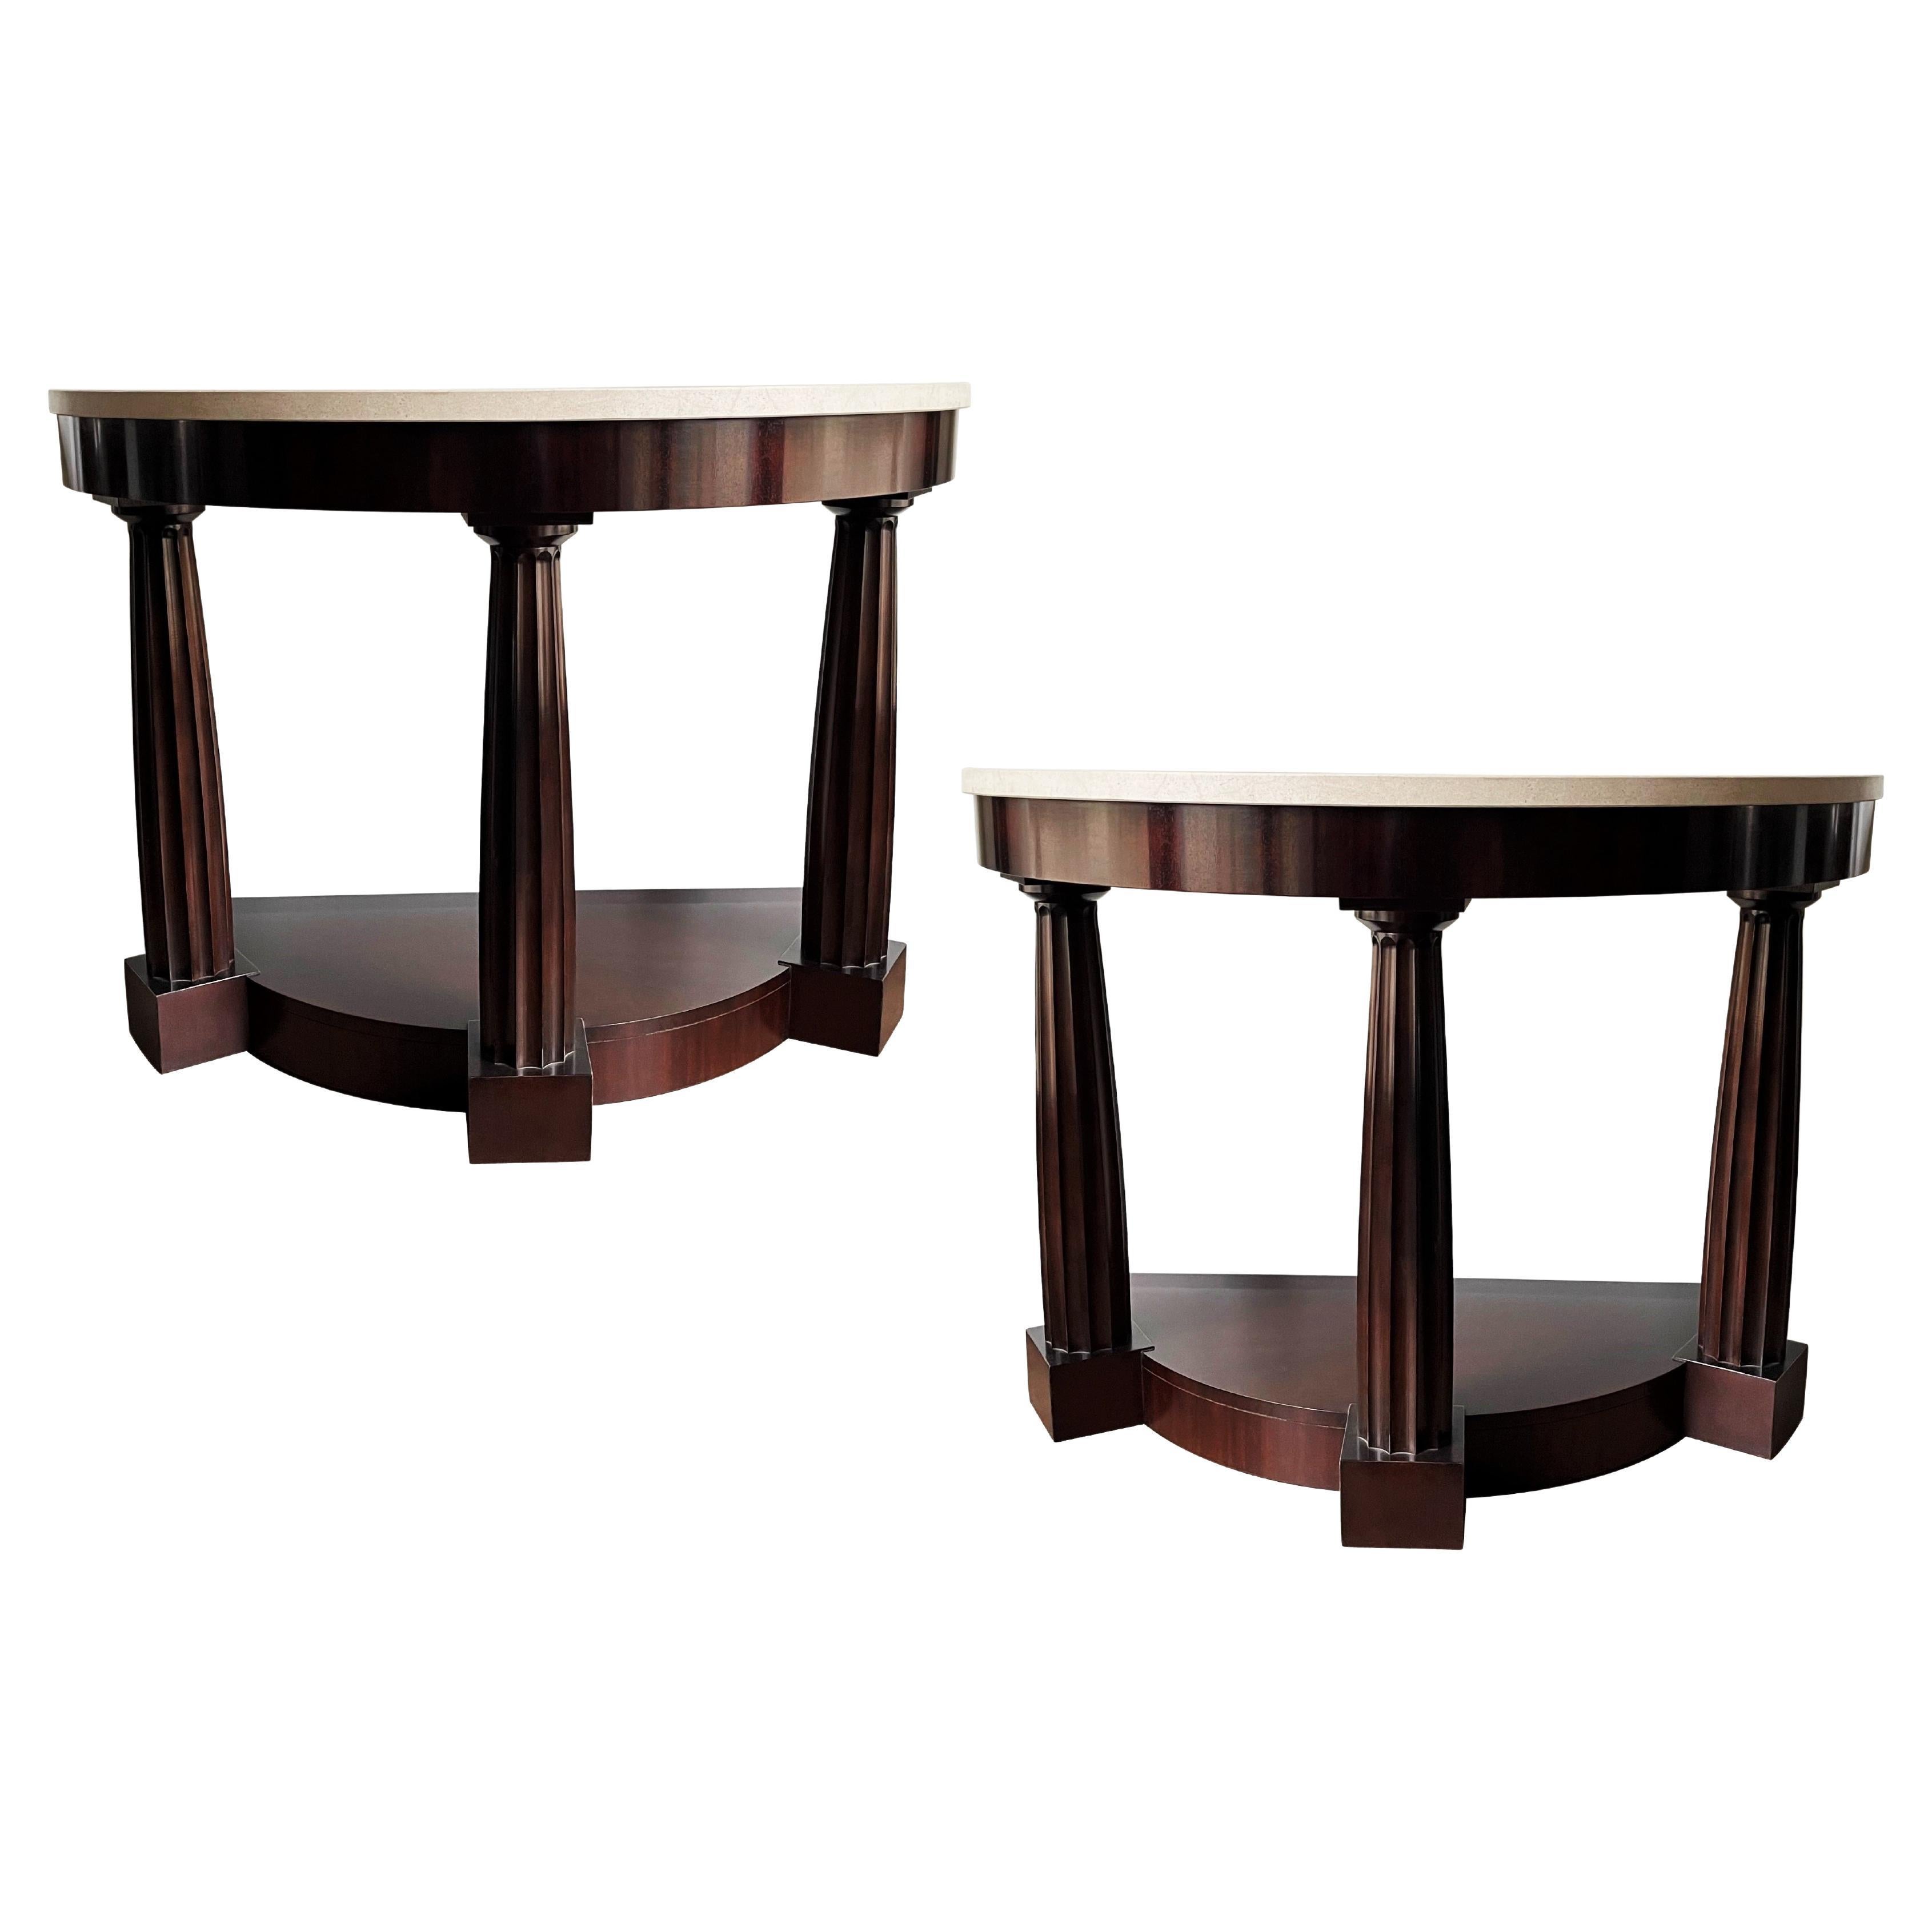 Temple Console Tables by Thomas Pheasant for Baker